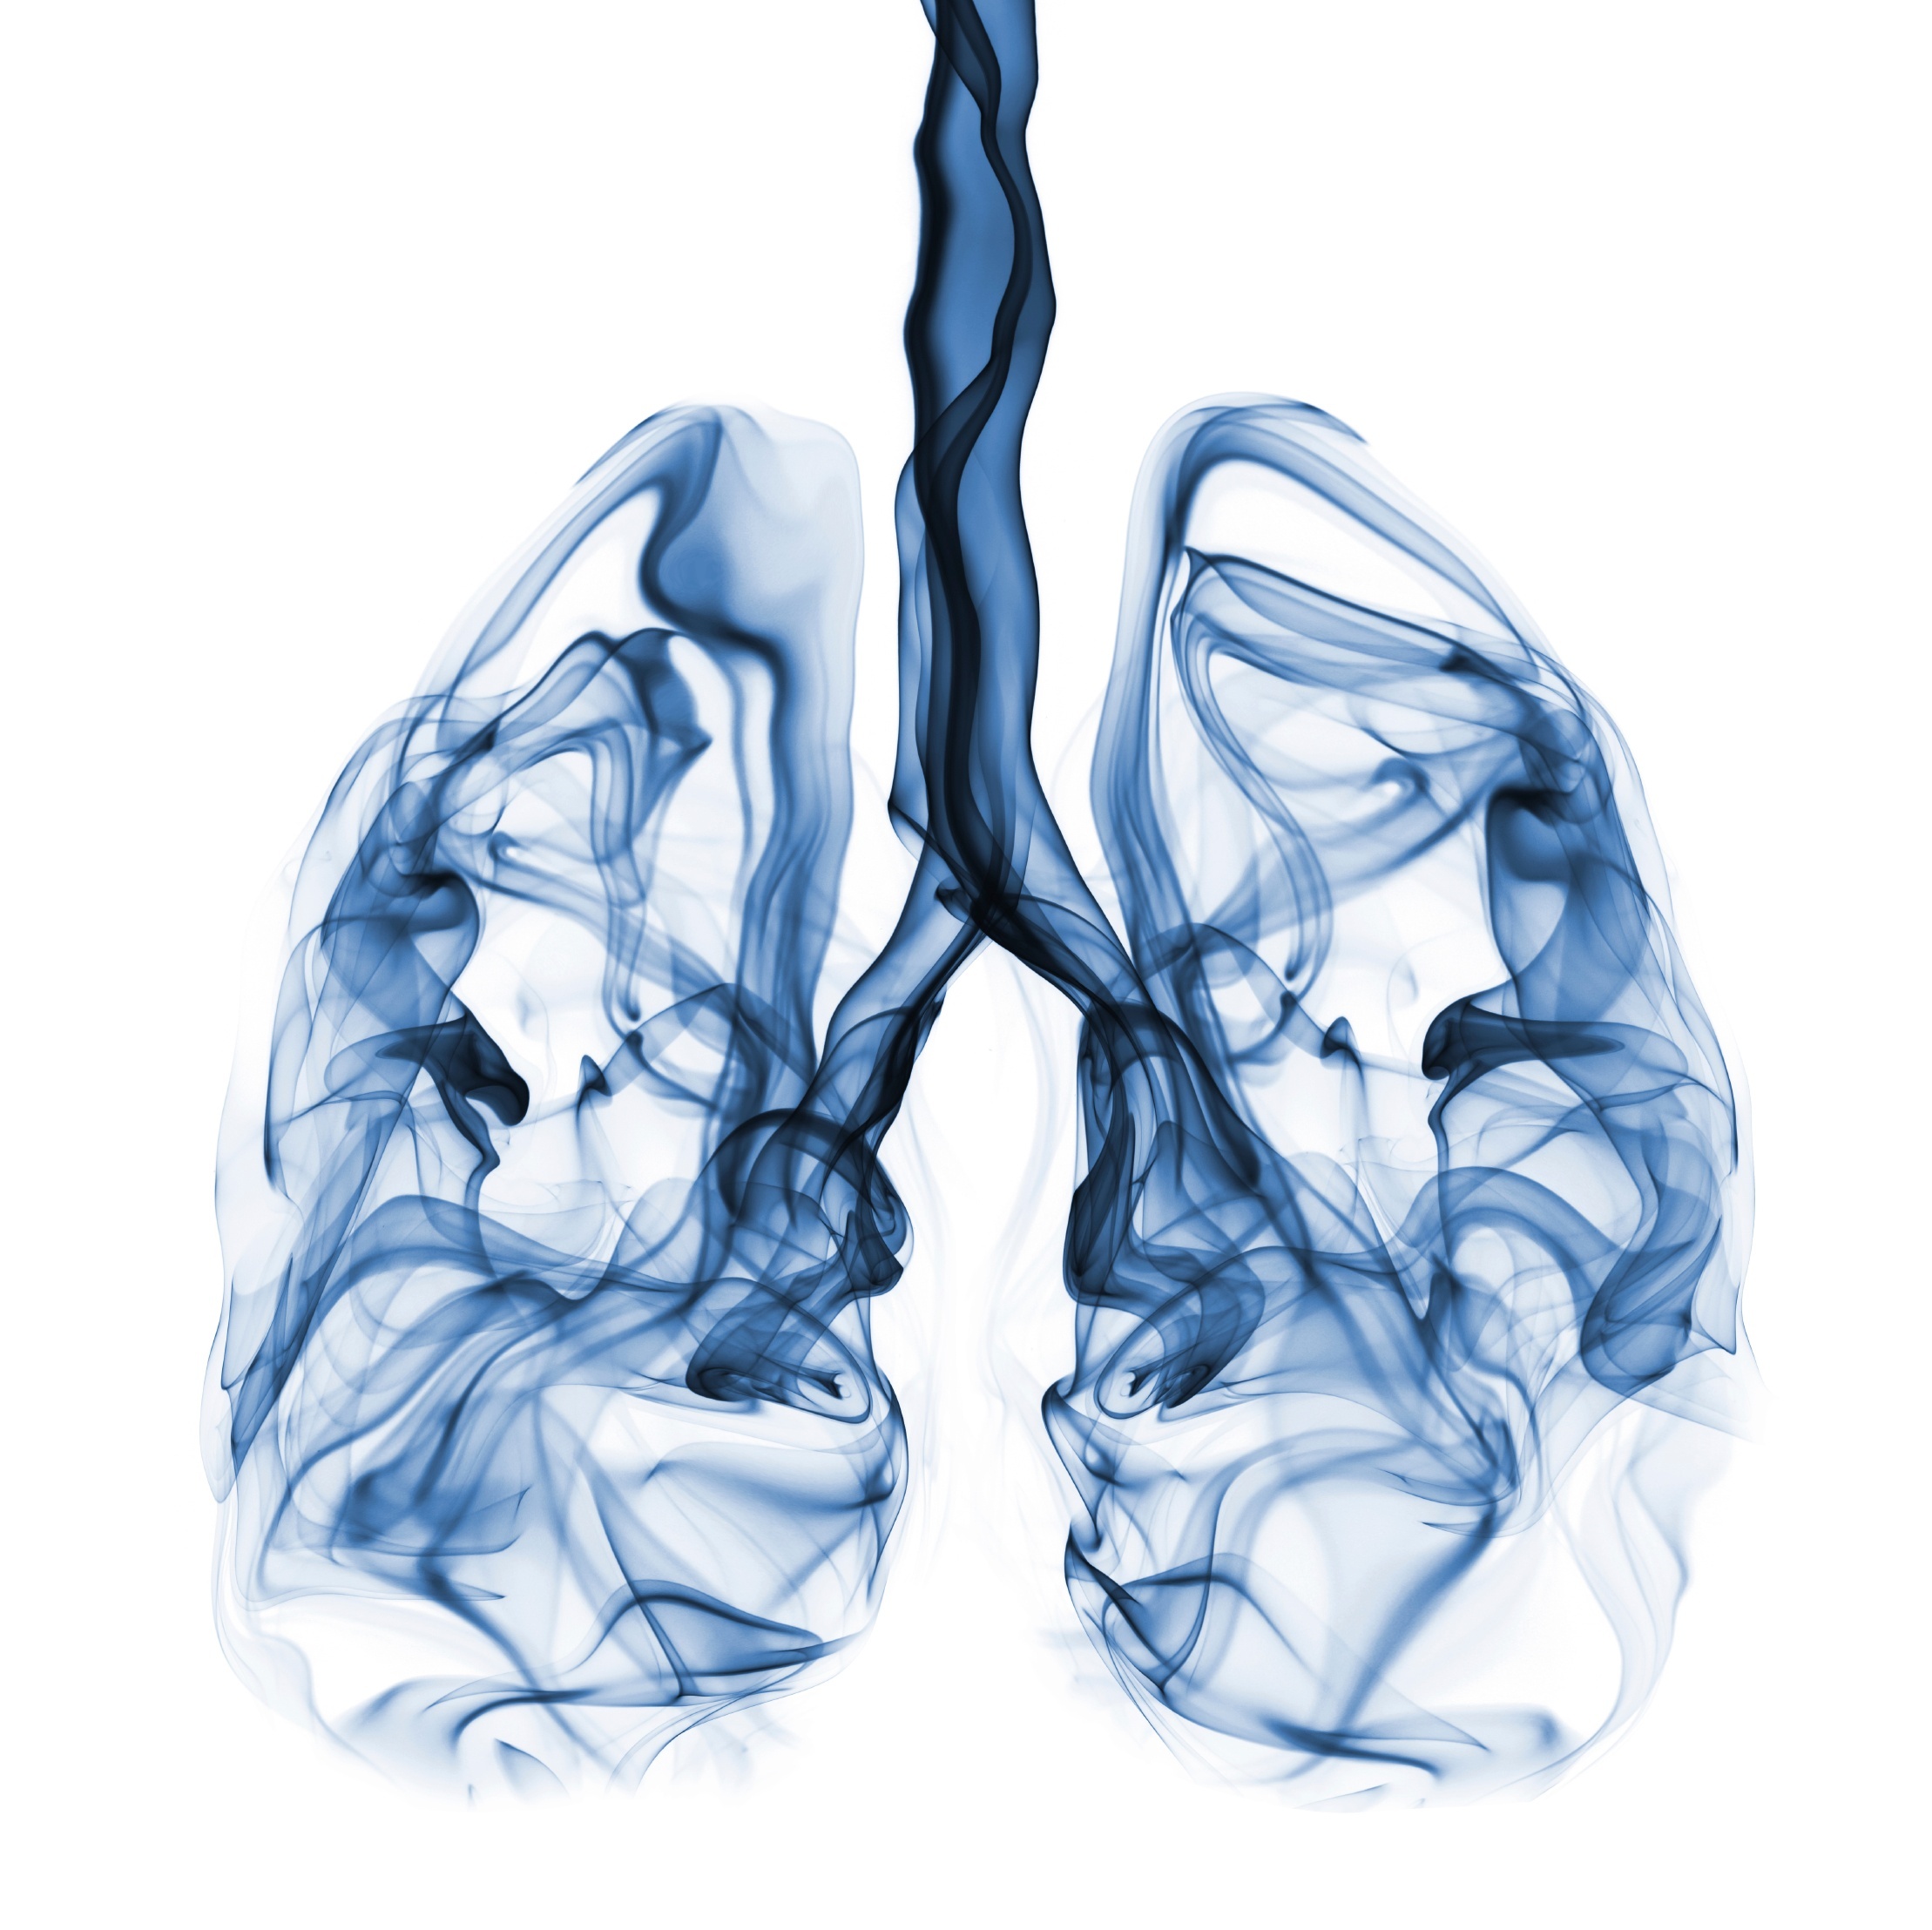 Radon and Lung Cancer